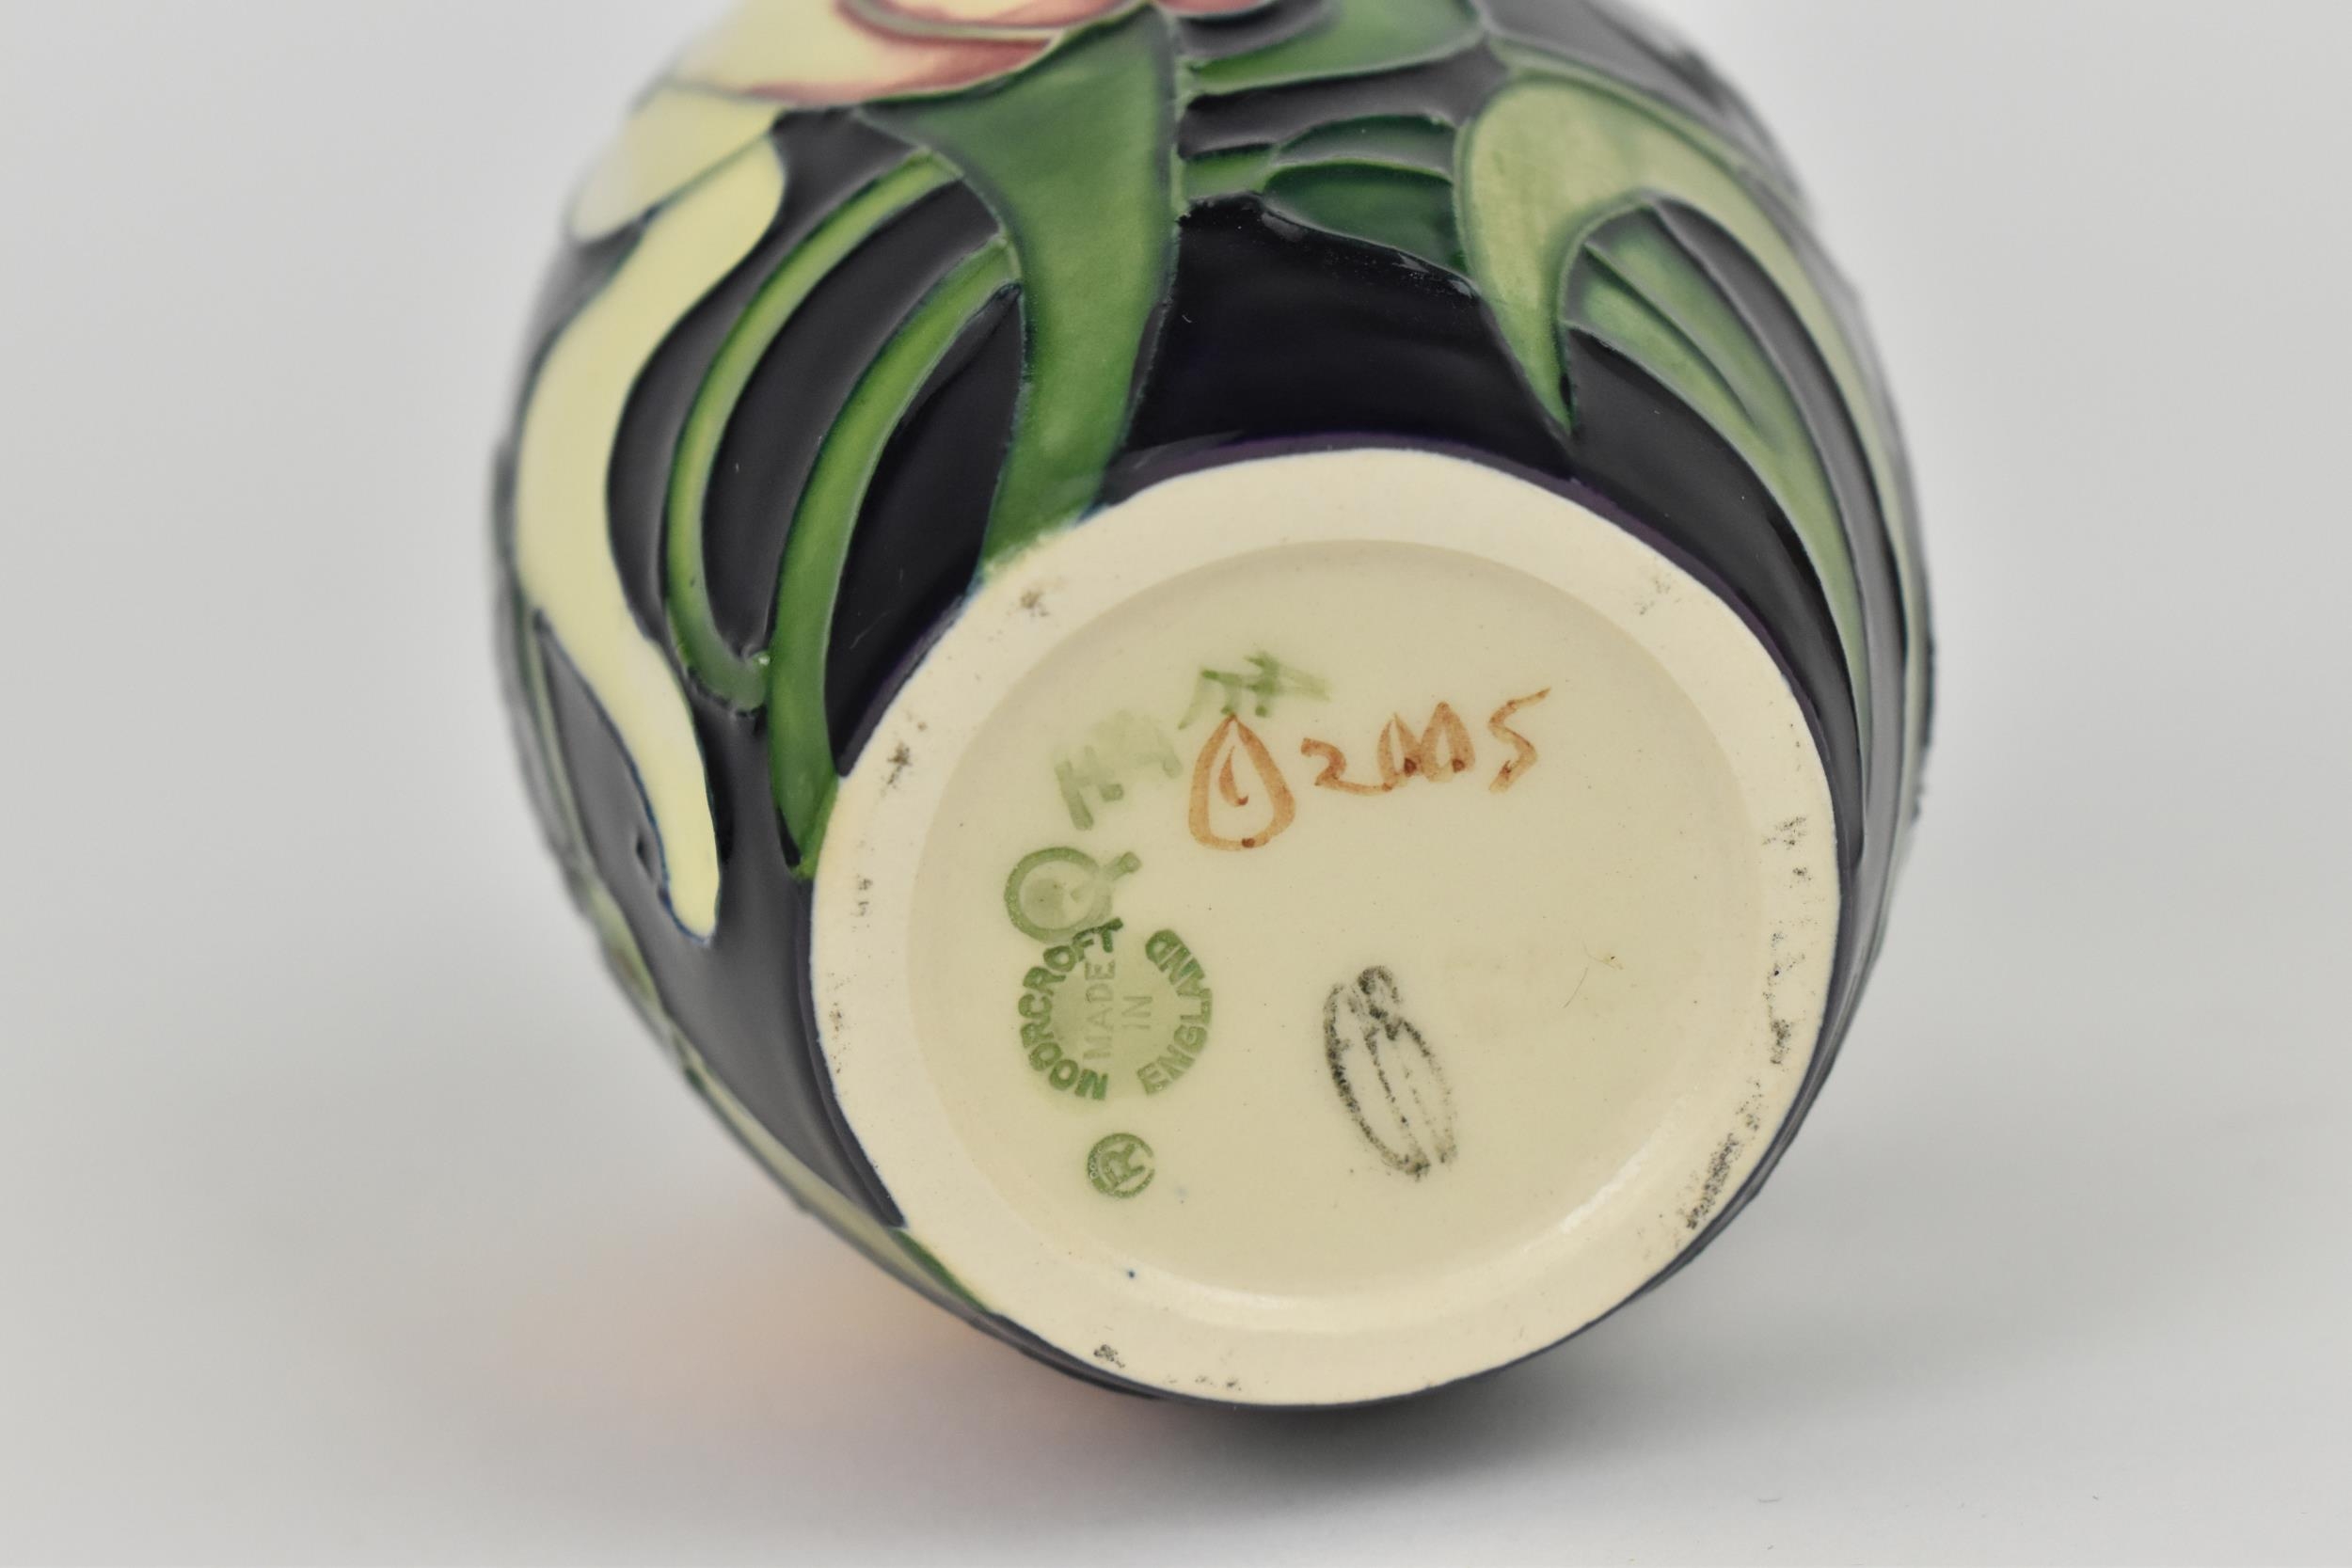 A Moorcroft ceramic vase by Emma Bossons in the 'Miss Alice' pattern, 2005, with signatures and - Image 3 of 4